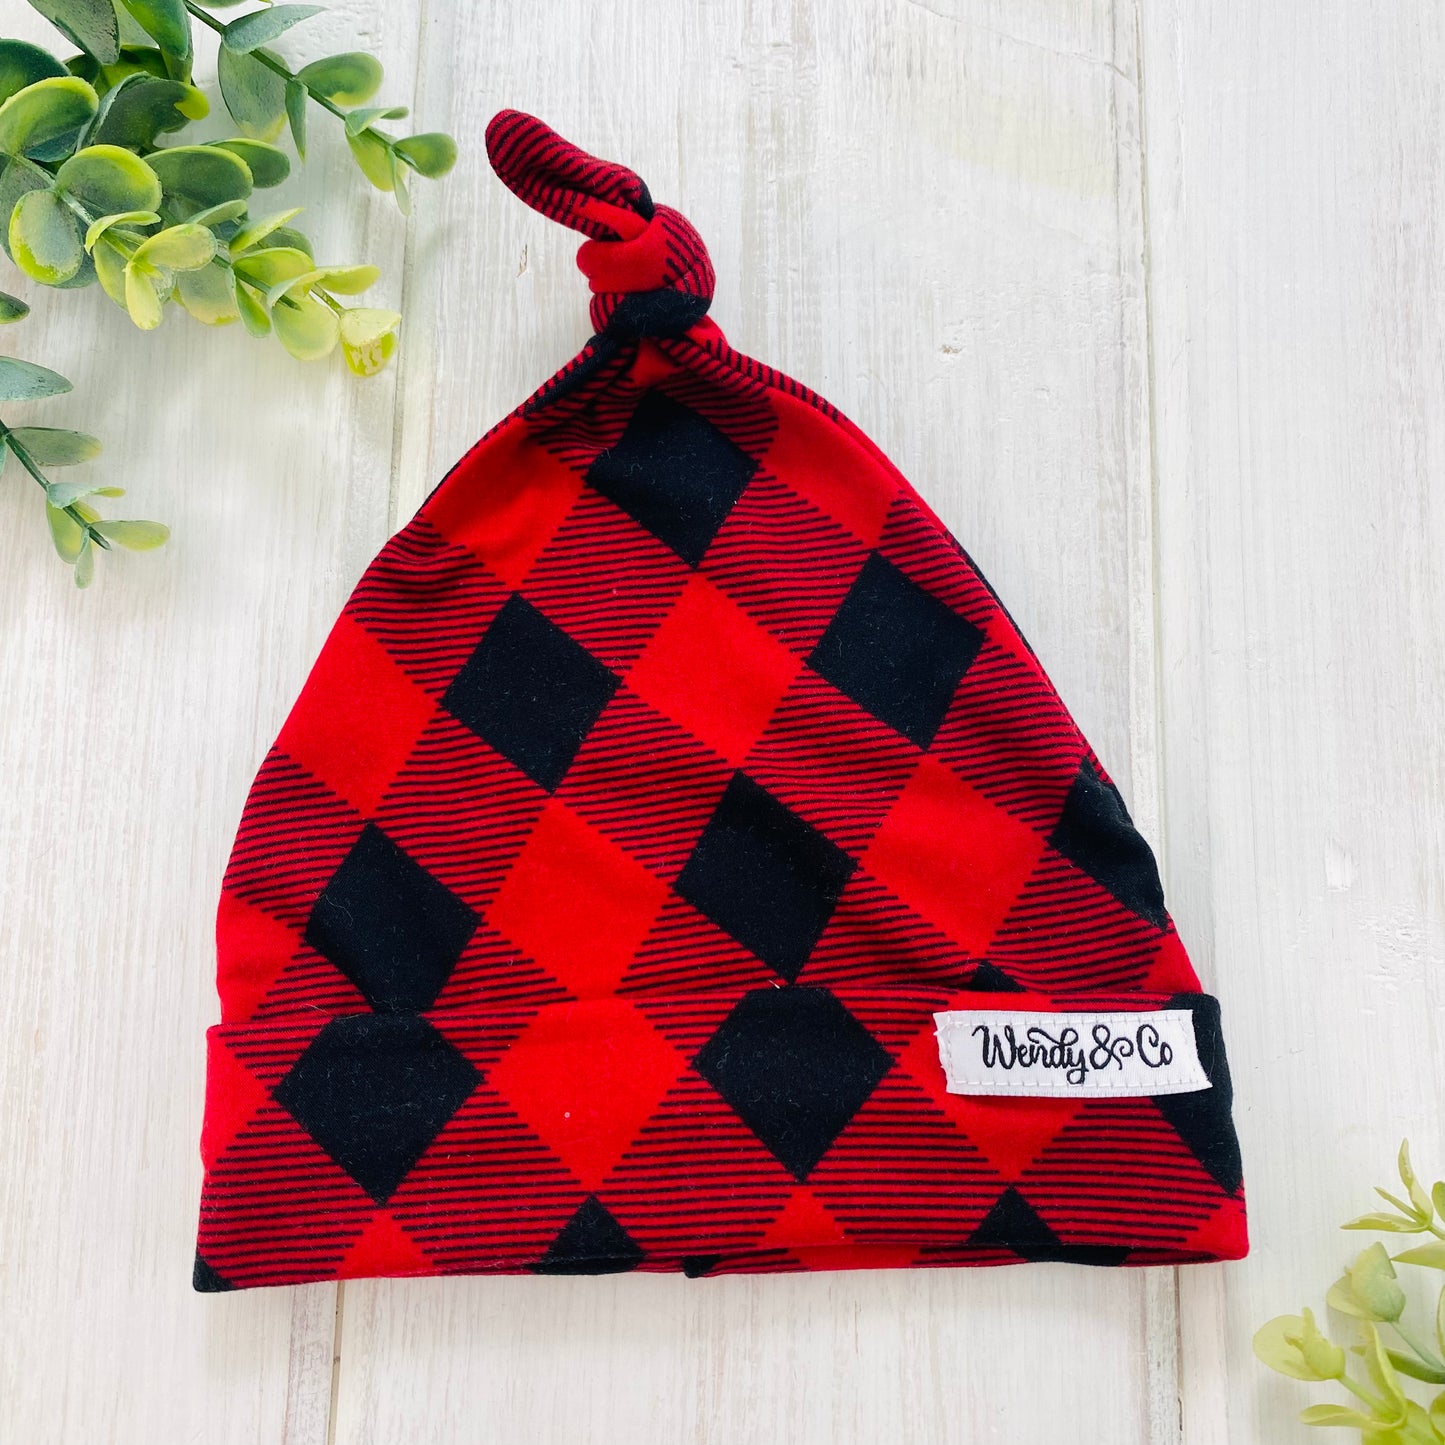 Black and red check super soft infant beanie.